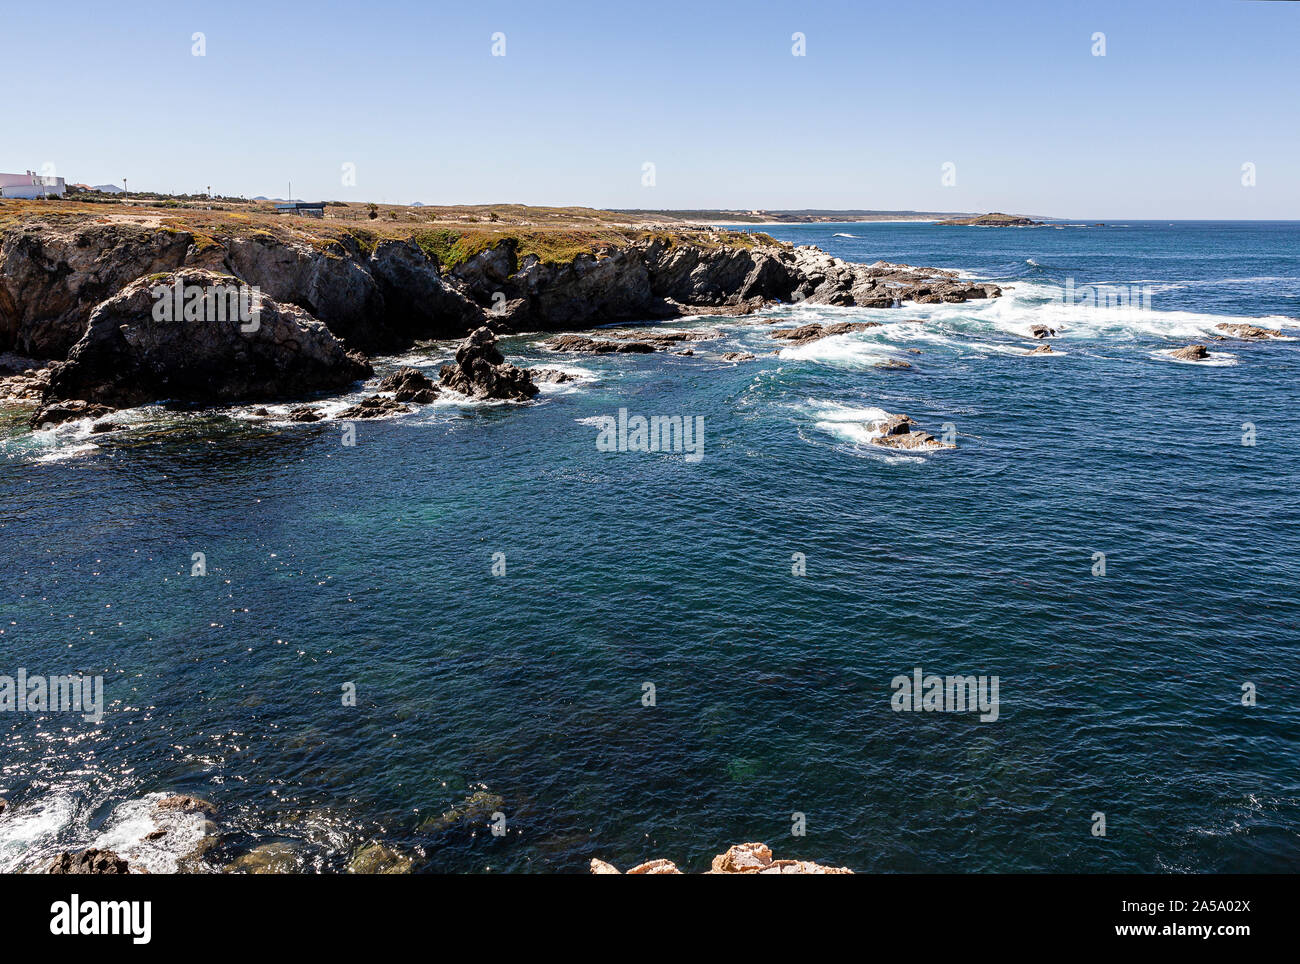 Route of the Fishermen, located in the southwest of Portugal, with its rock formations and crystalline sea. Stock Photo